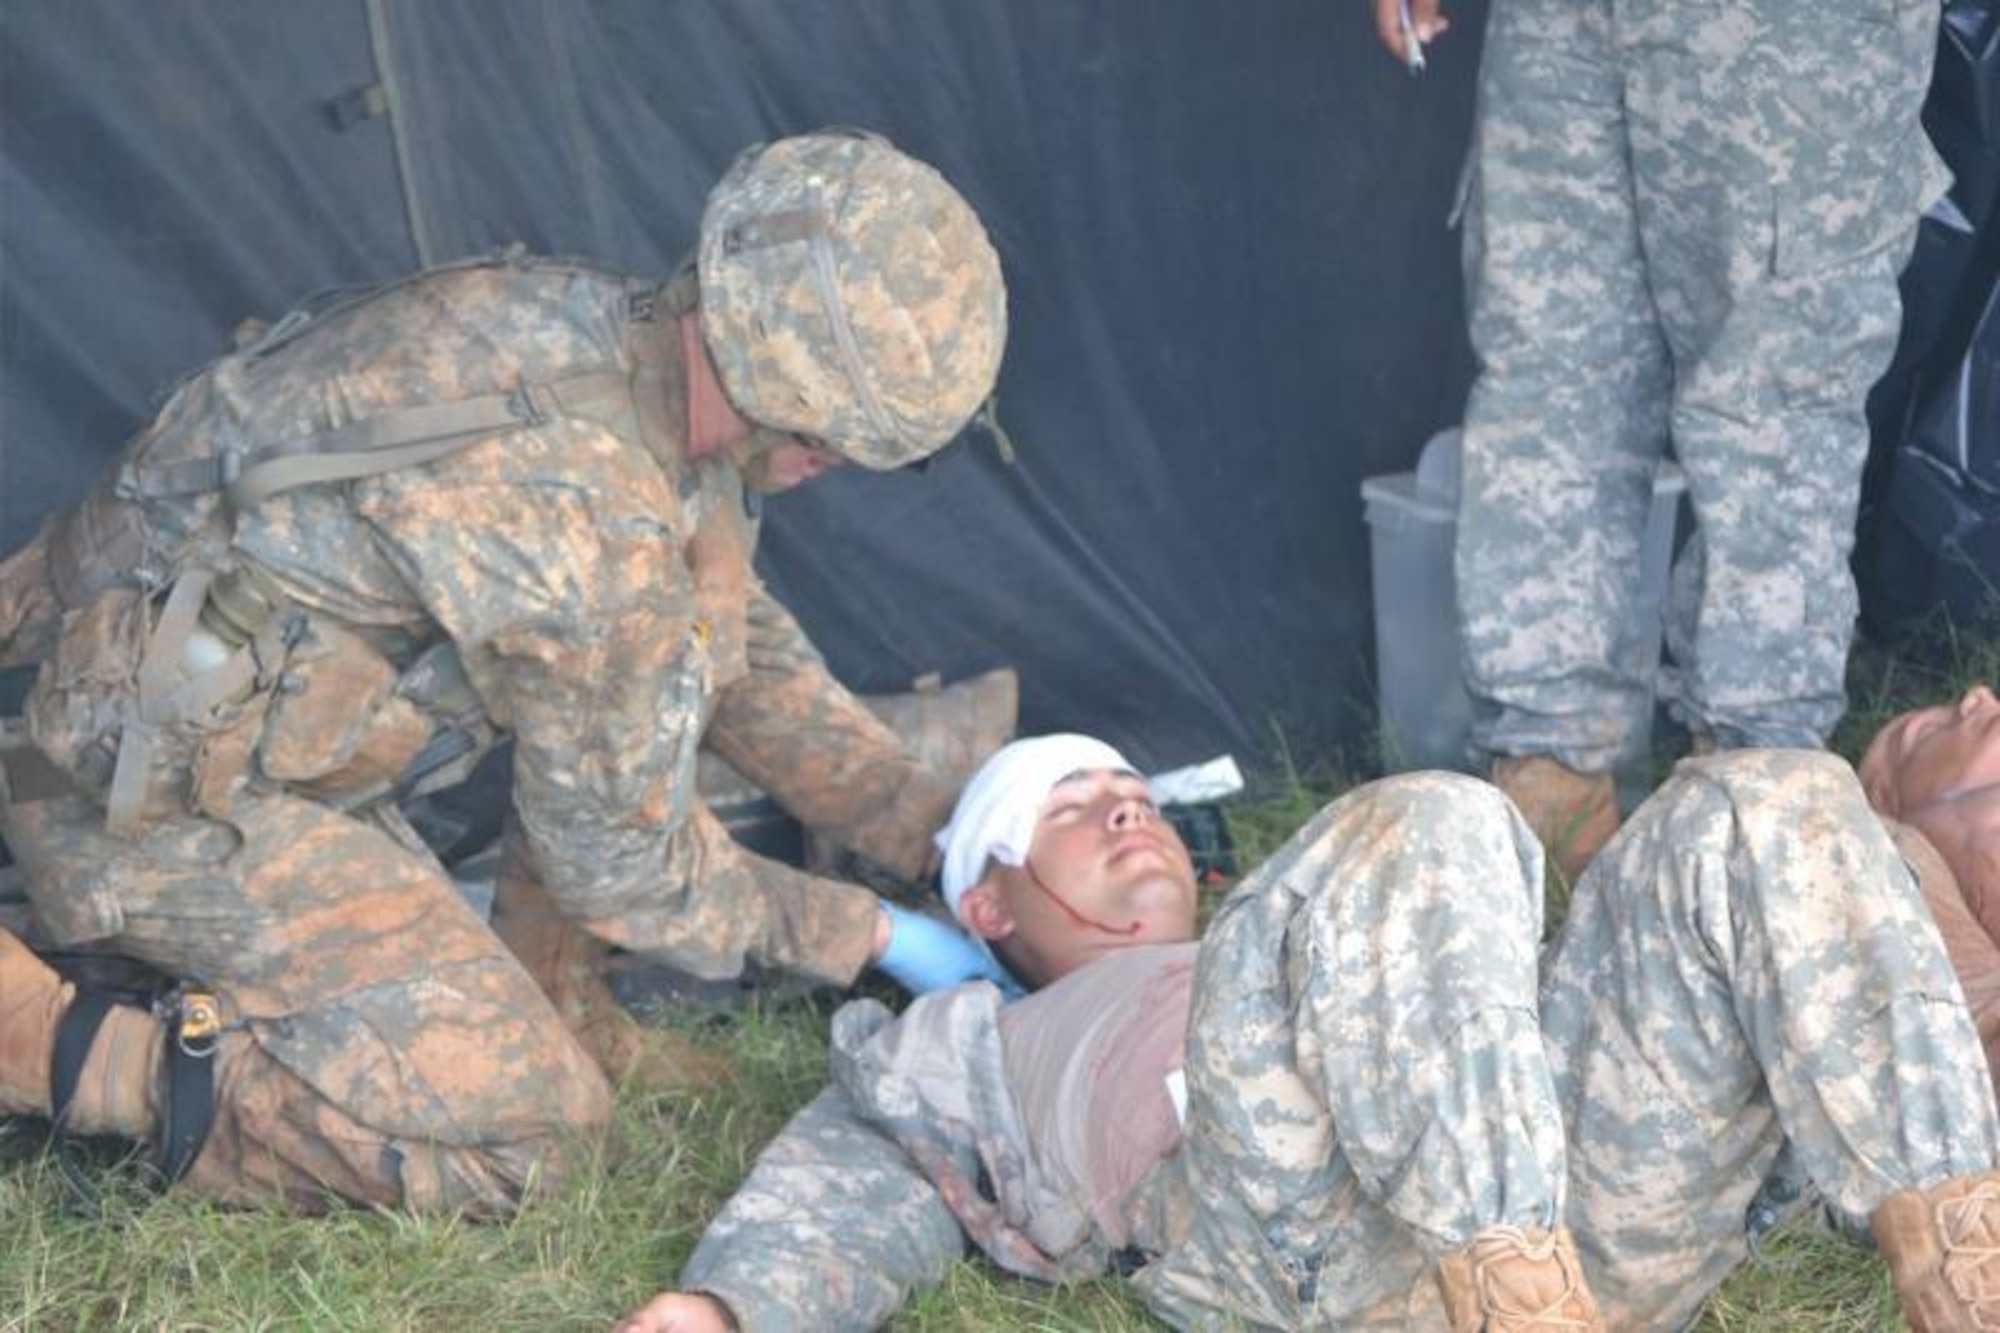 Expert Field Medical Badge course candidates apply a dressing to a simulated head injury during a mass casualty scenario in a casualty collection point set up at the EFMB course, which was held at Schofield Army Barracks, Hawaii, March 31 through April 11, 2014. To successfully complete the course, students must demonstrate their proficiency at tactical combat casualty care, standard and non-standard evacuation operations, take a written test, execute U.S. Army Warrior communications and chemical, biological, radiological, nuclear and high-yield explosives tasks, perform day and night land navigation and complete a 12-mile road march. (U.S. Army photo courtesy of 25th Infantry Division)